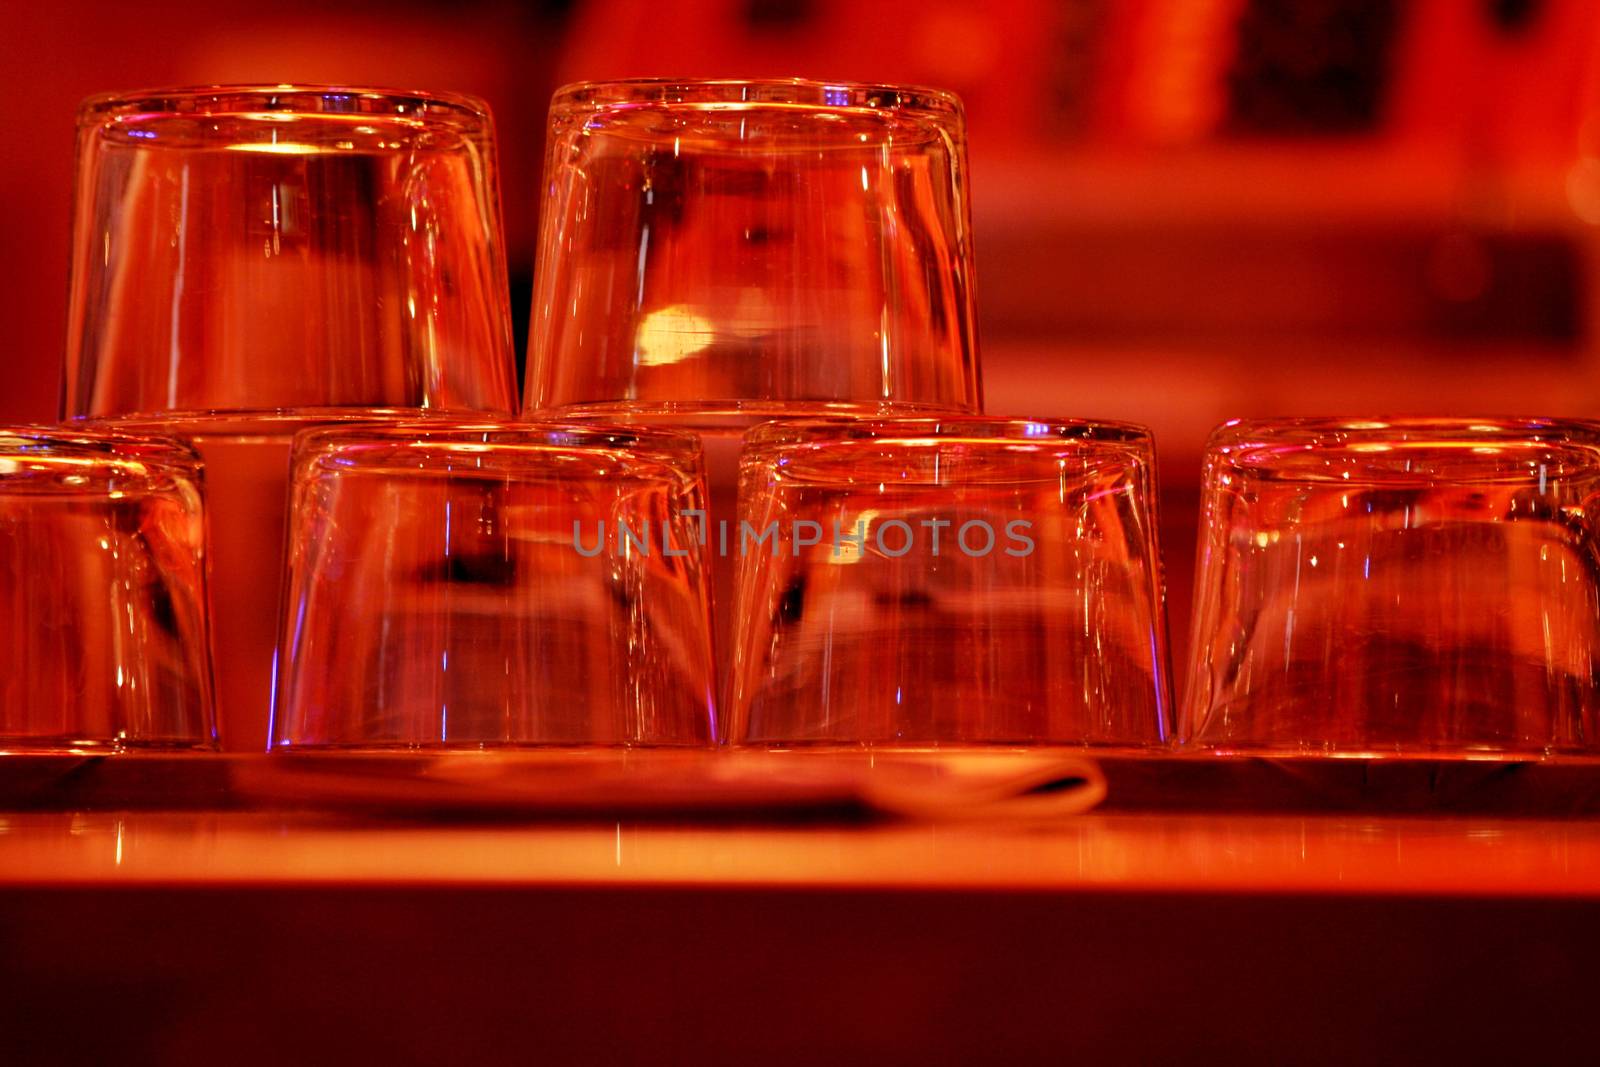 Color photo in red tones of a group of upturned clear wine glasses sparkling in the light in a pub / public house restaurant bar at night in Chueca in Madrid Spain. The multiple glasses have just been washed and dried, and are displayed stacked upside-down on the top of the bar where they are reflecting the light from above, ready to be filled with wine and served to the evening's customers. 